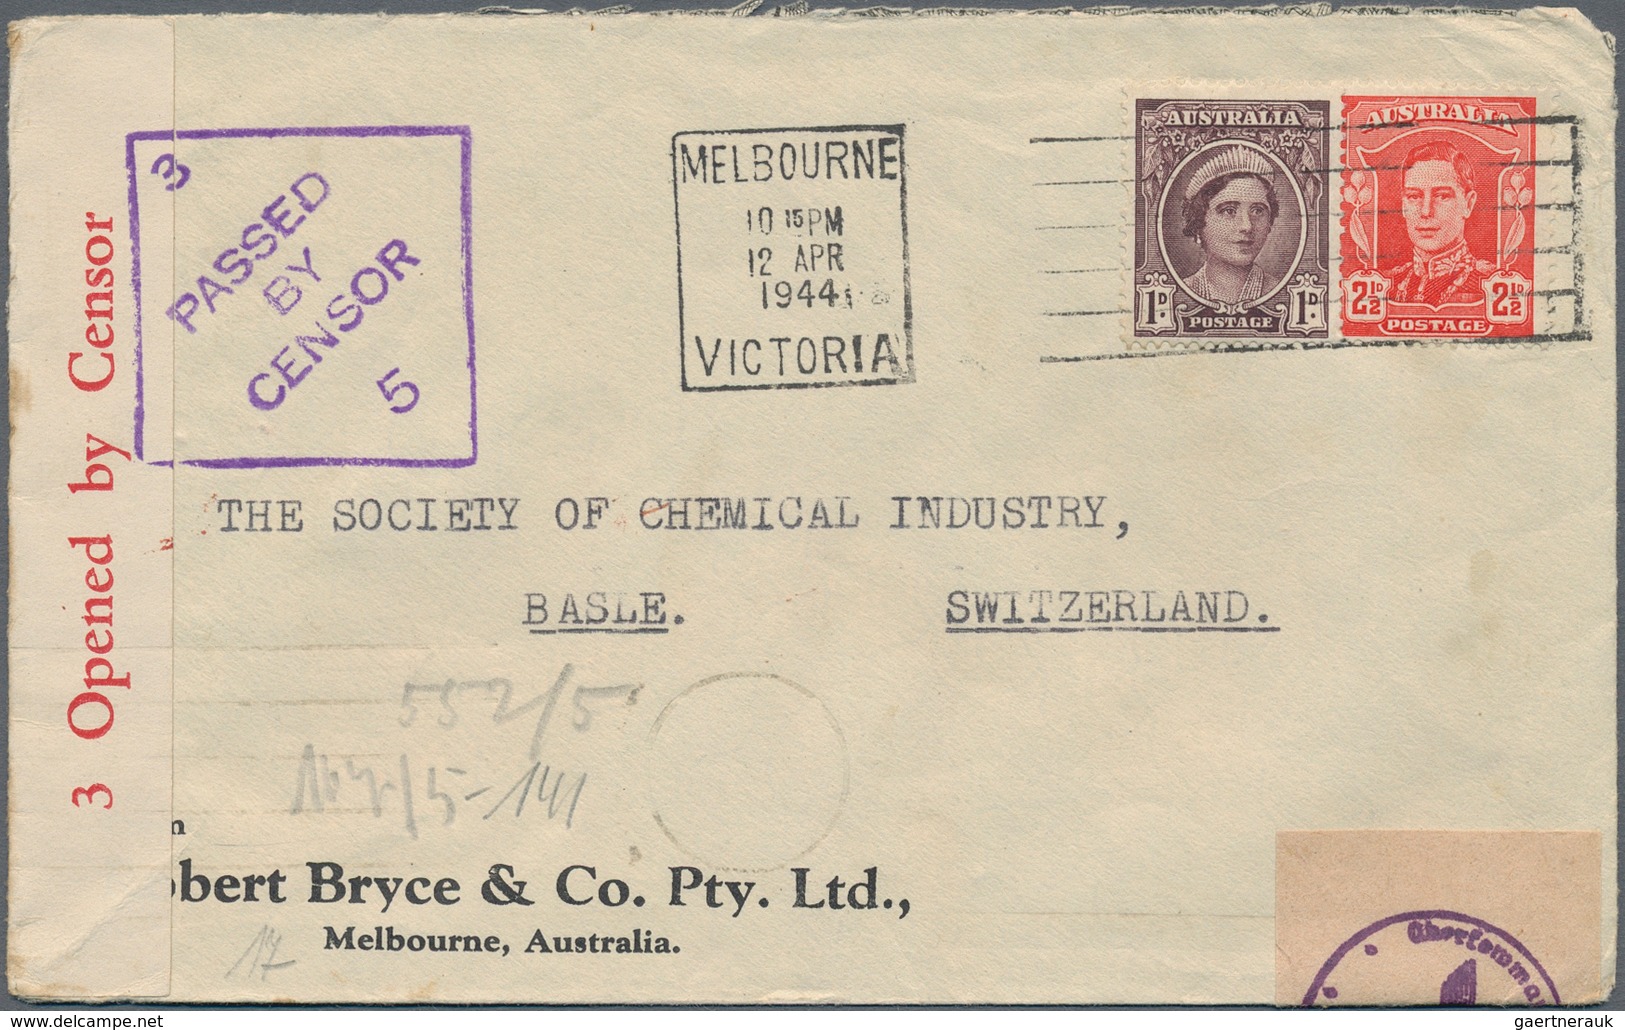 Australien: 1927/66, ca. 90 covers (inc. one ppc) mostly used to Switzerland with WWII censorship us